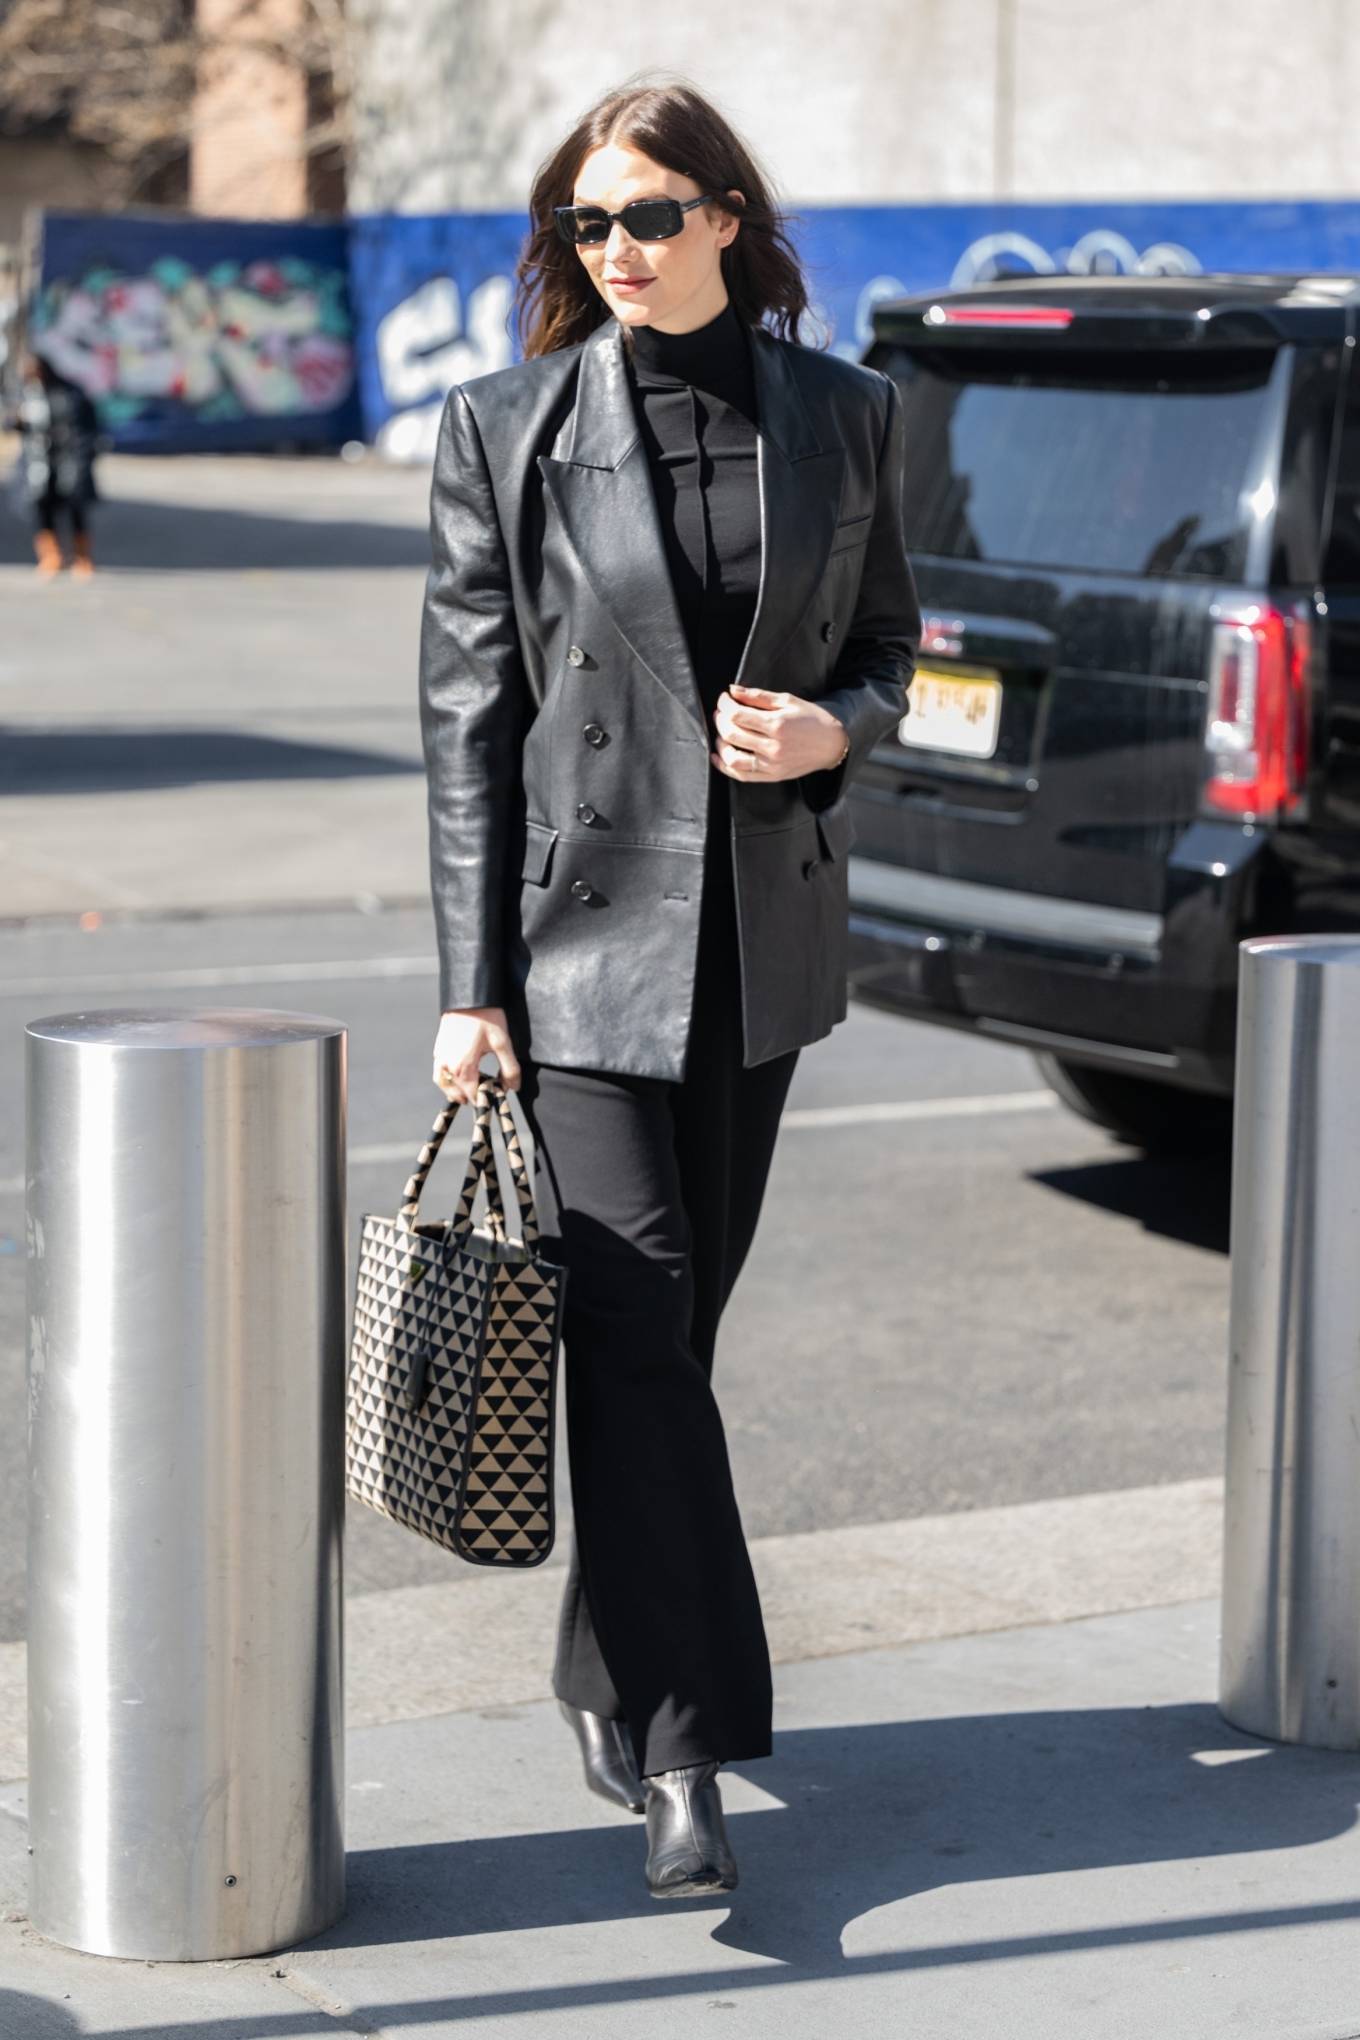 Karlie Kloss - Wearing a black leather jacket as she steps out in New York